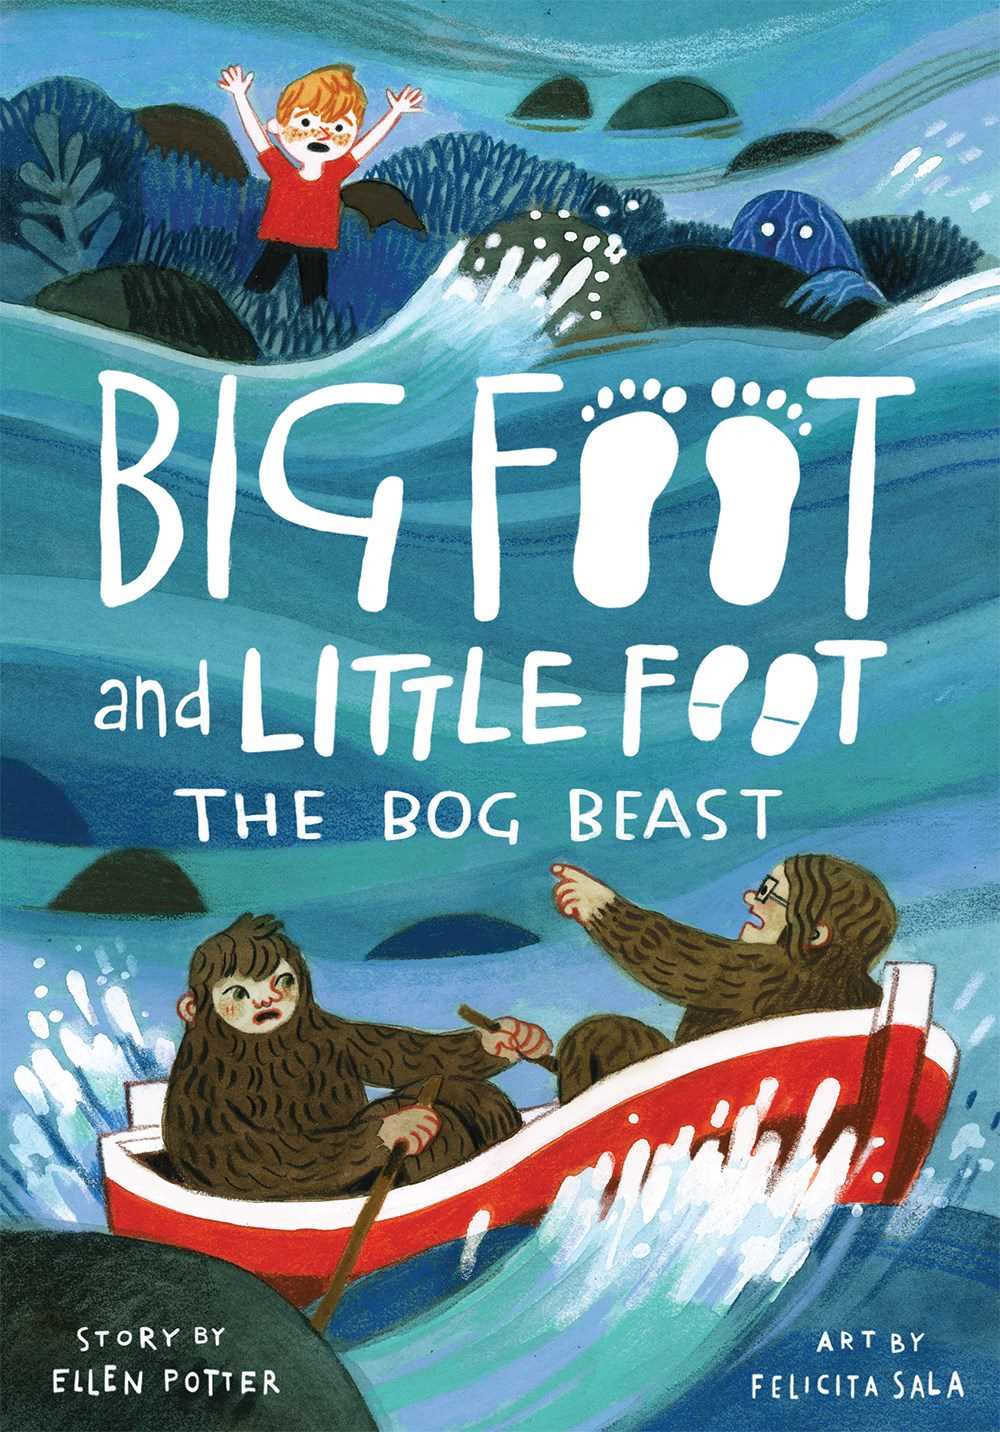 The Bog Beast (Big Foot and Little Foot #04)